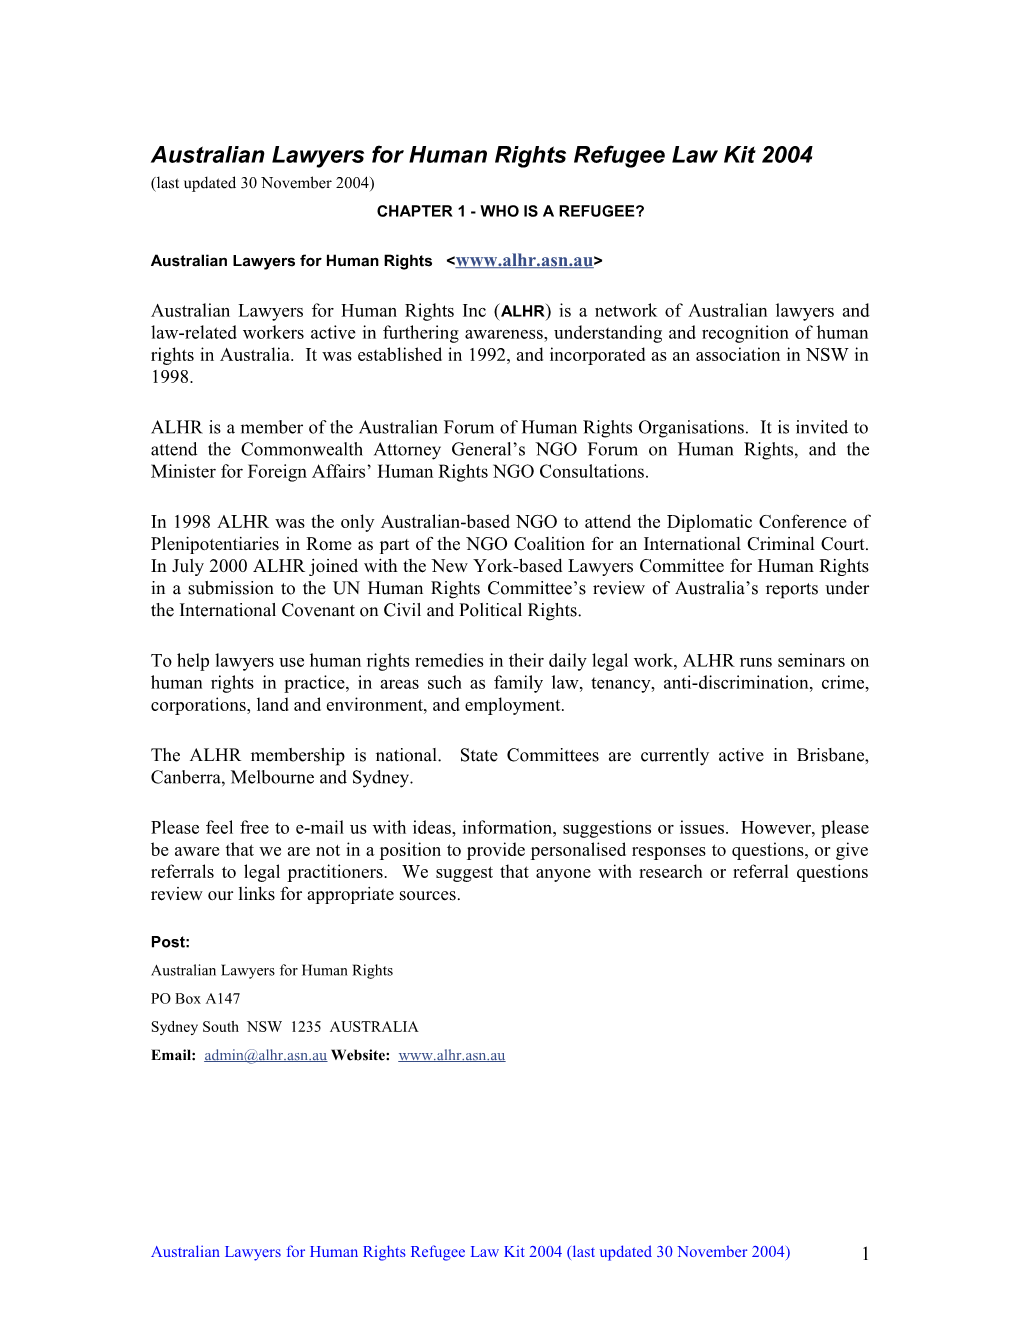 Australian Lawyers for Human Rights Refugee Law Kit 2003